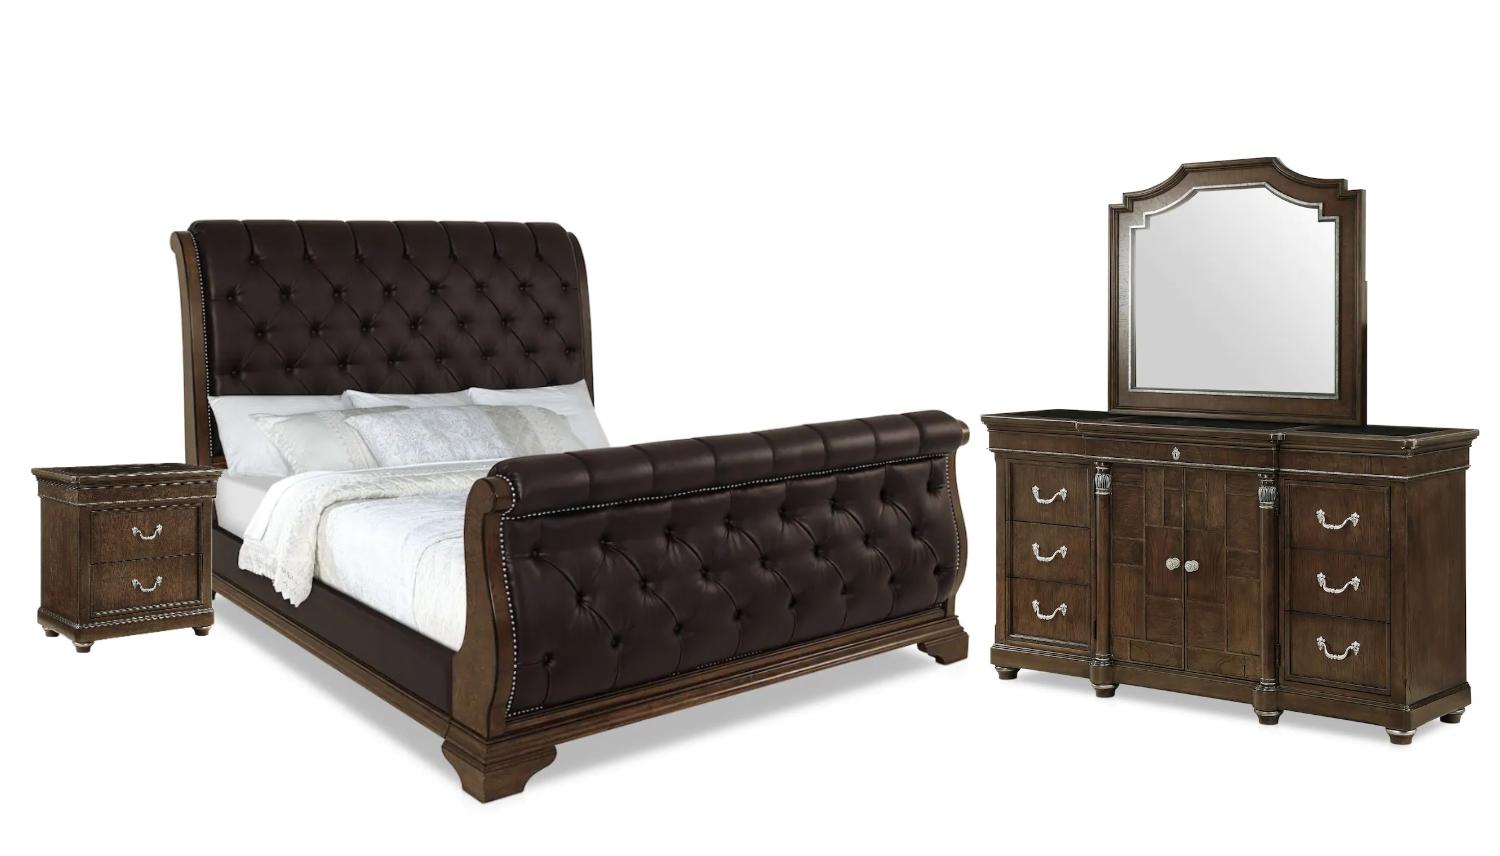 Modern, Transitional Sleigh Bedroom Set Belmont Mahogany 275146-2316-BR-2NDM-5PCS in Brown Fabric